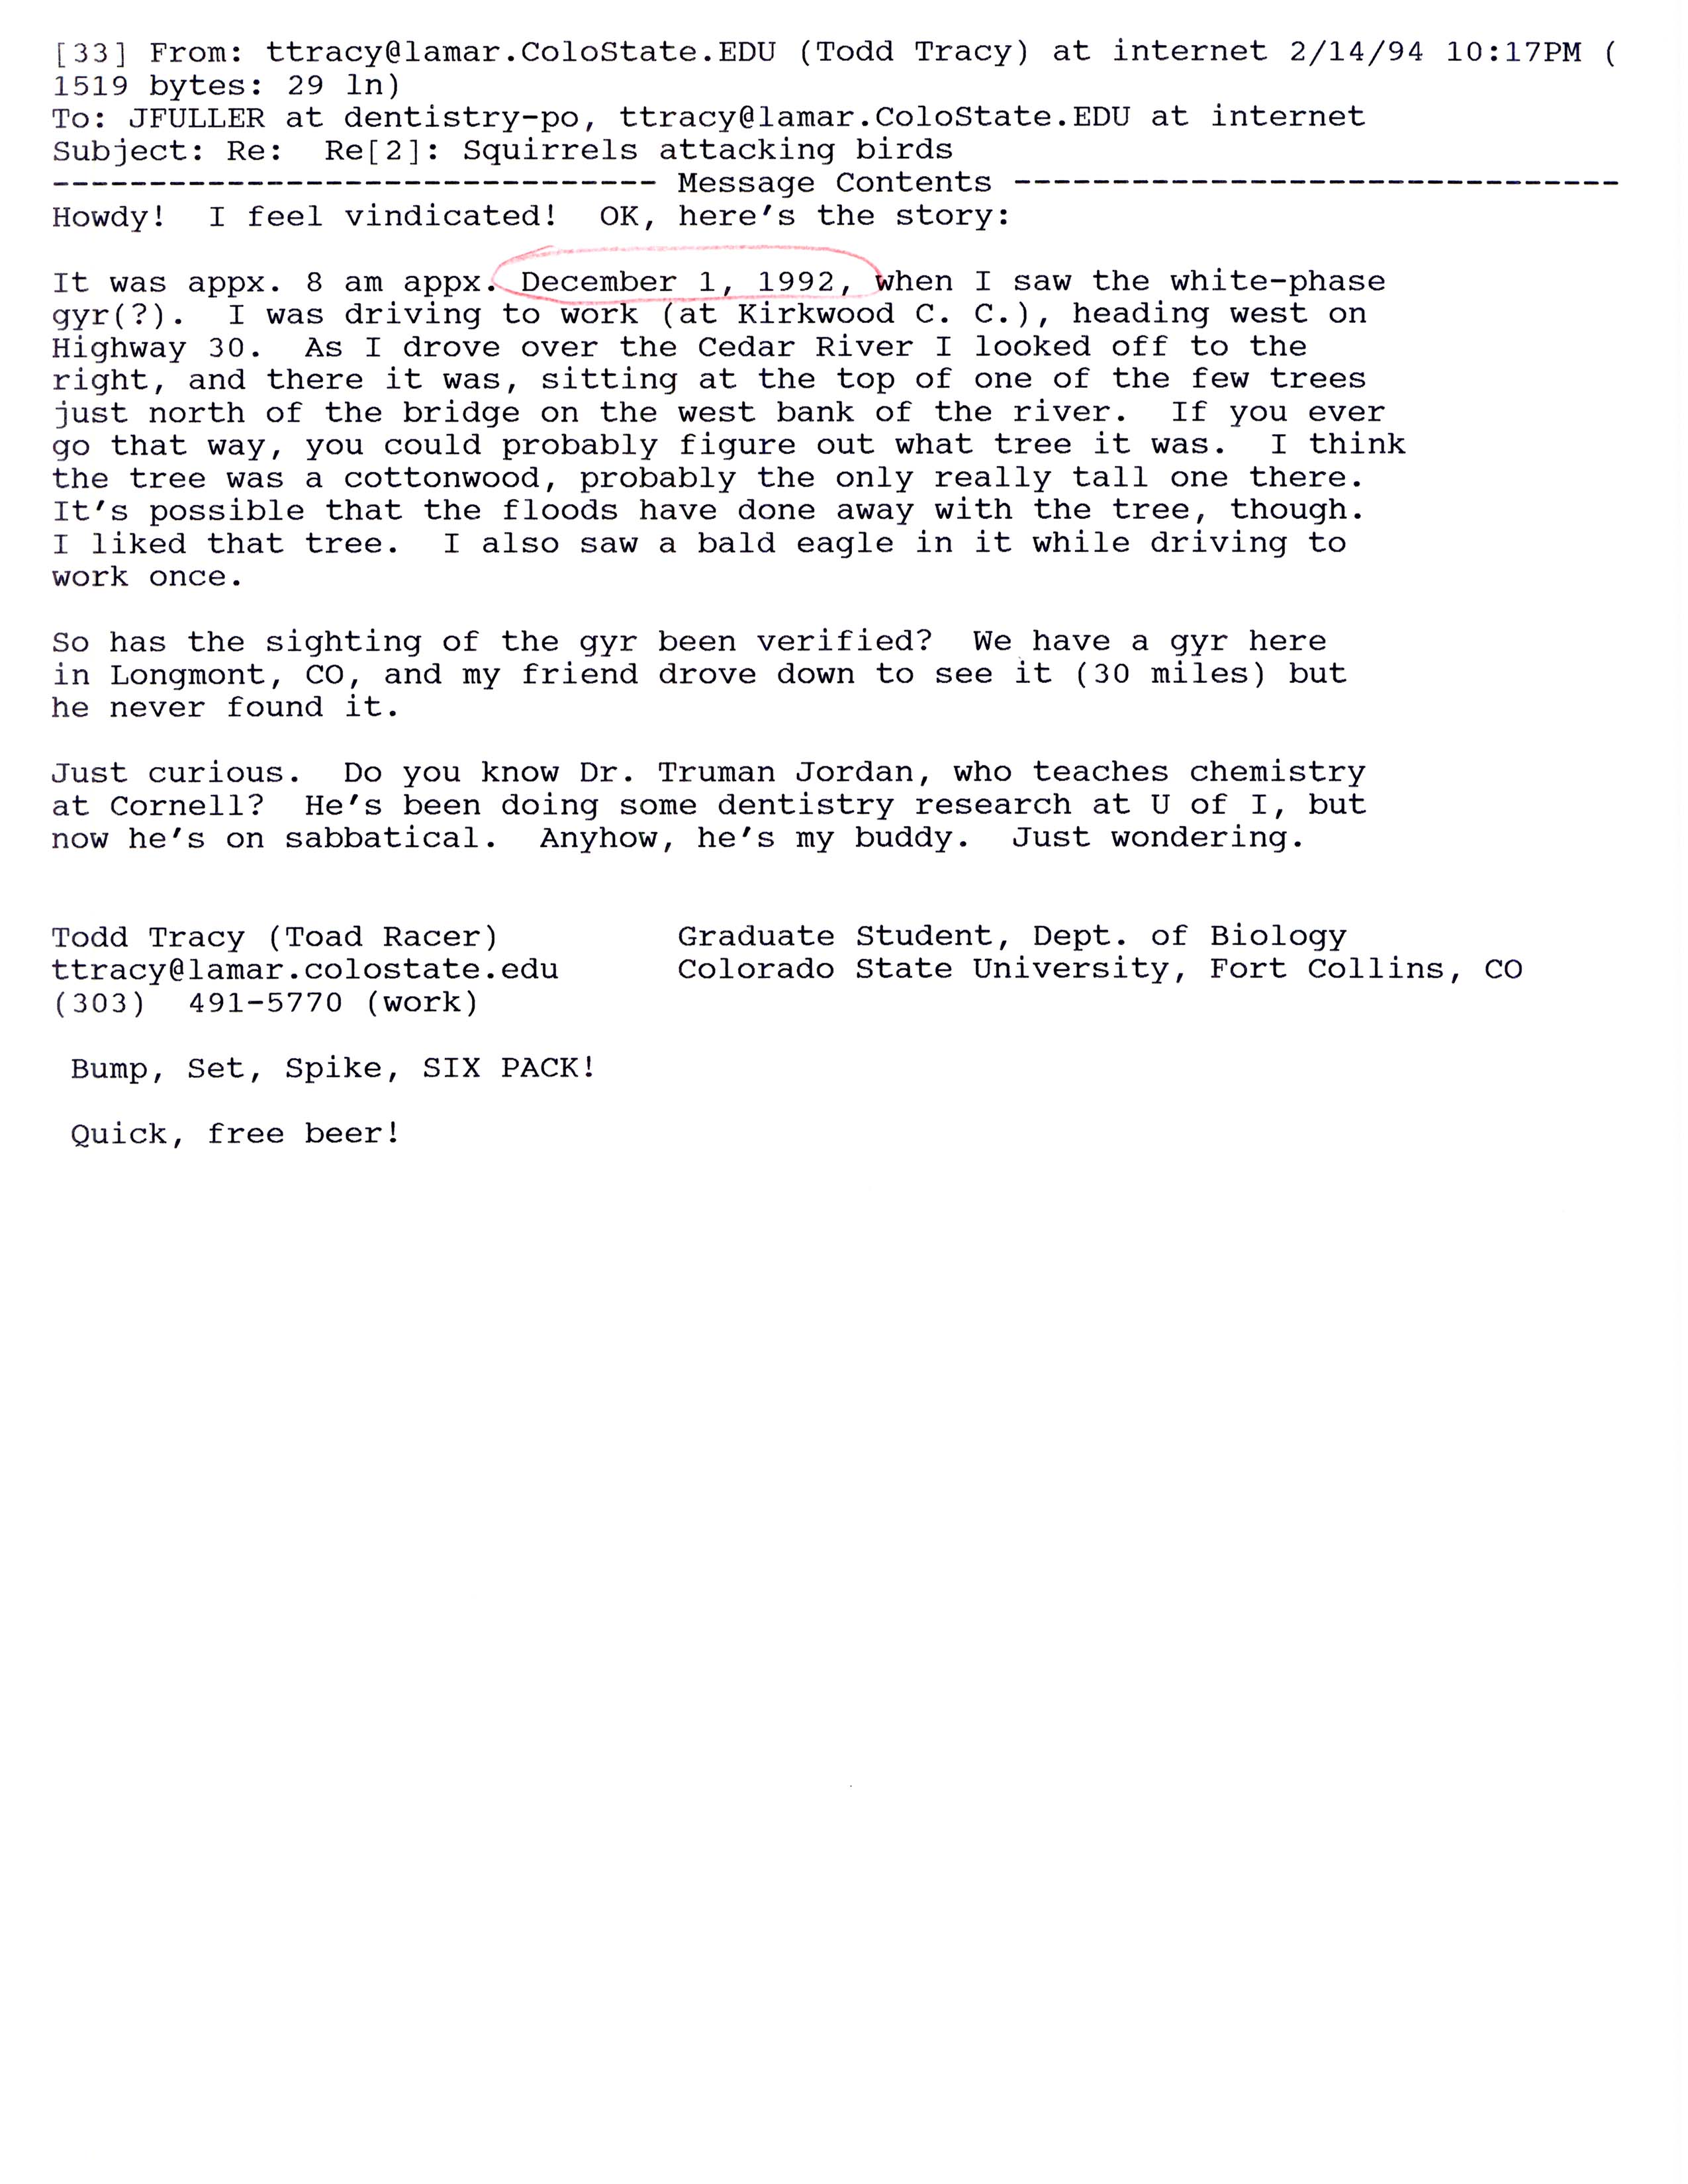 Todd Tracy email to Jim Fuller regarding Gyrfalcon sighting, February 14, 1994